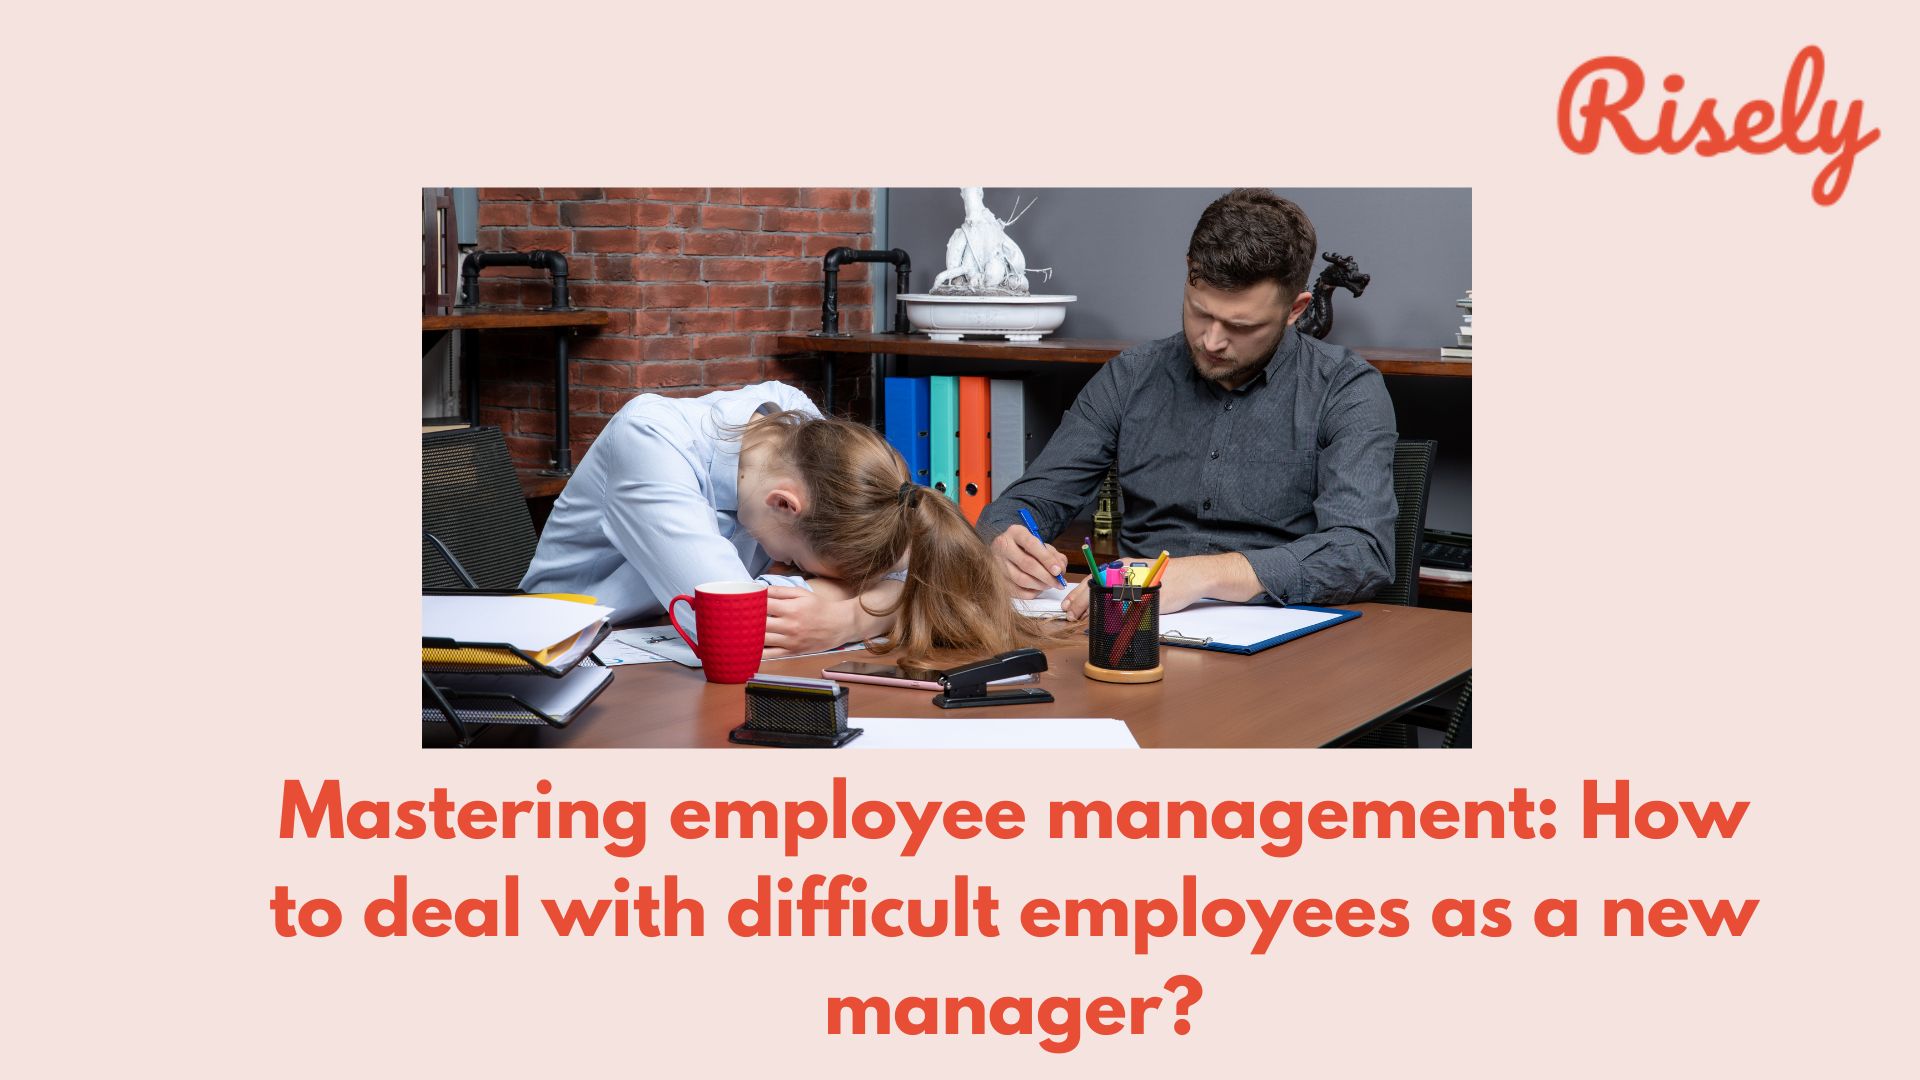 Mastering employee management: How to deal with difficult employees as a new manager?